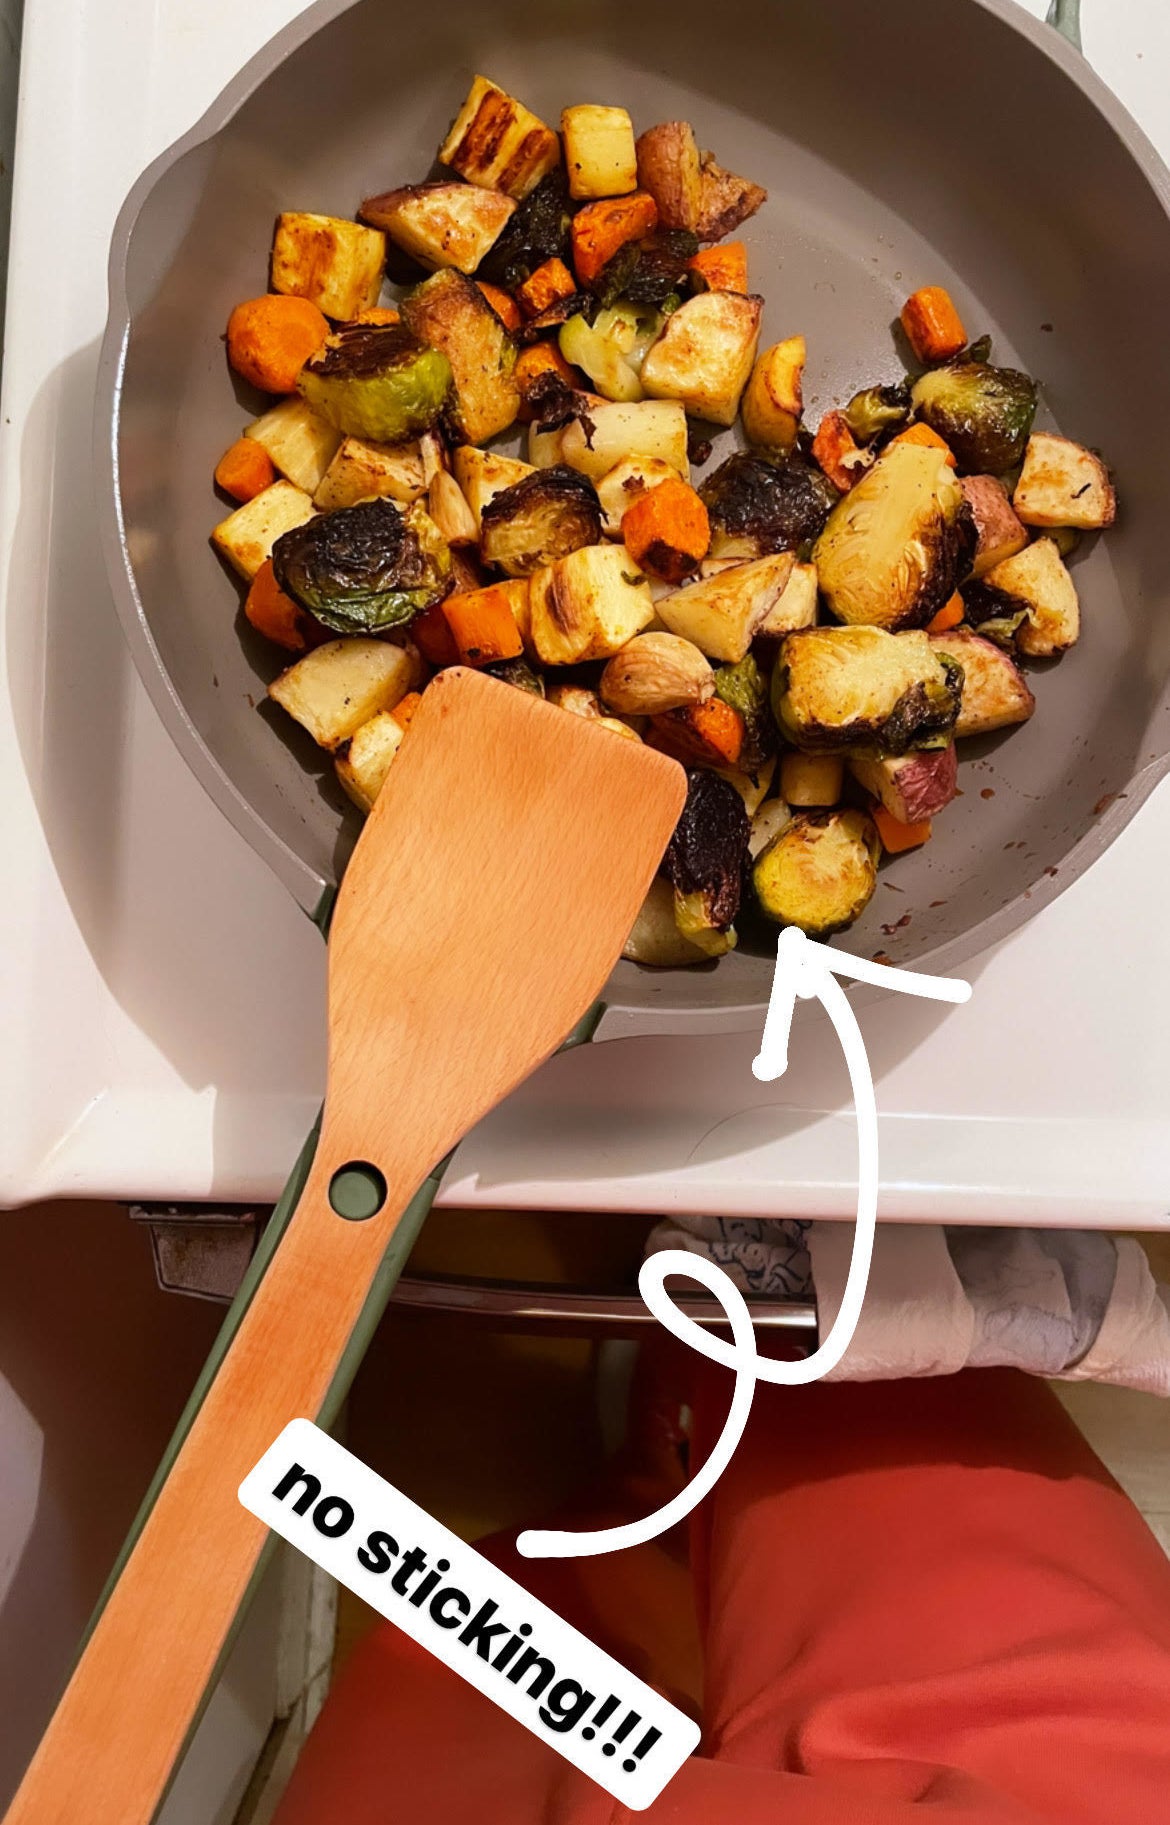 A bunch of veggies not sticking to the pan while it is sitting on a stove